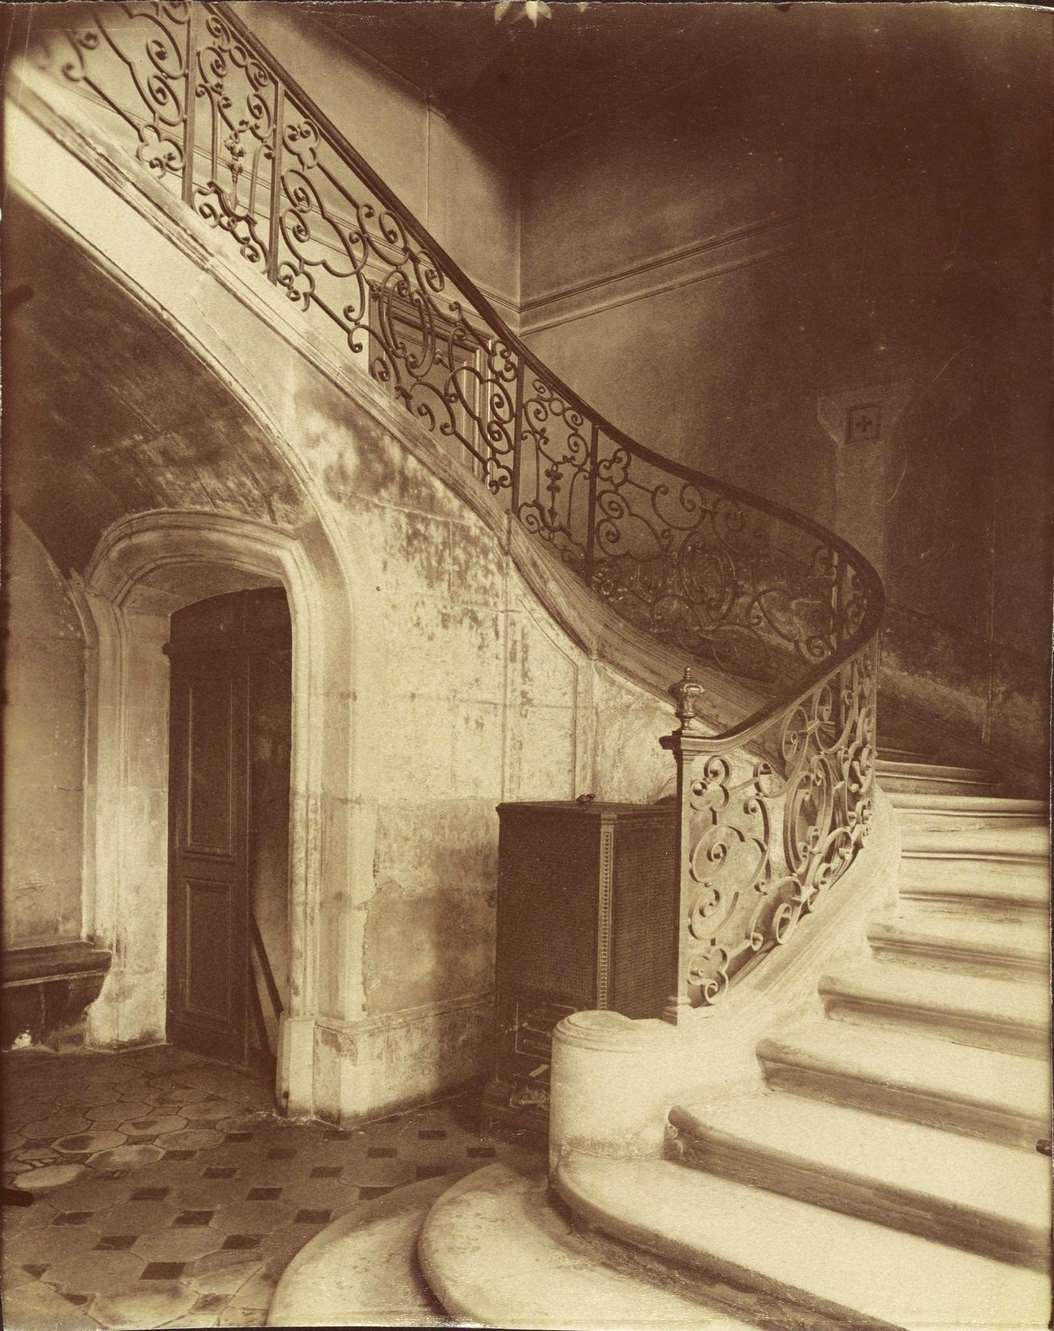 Staircase, Hotel de Brinvilliers, rue Charles V, 1900